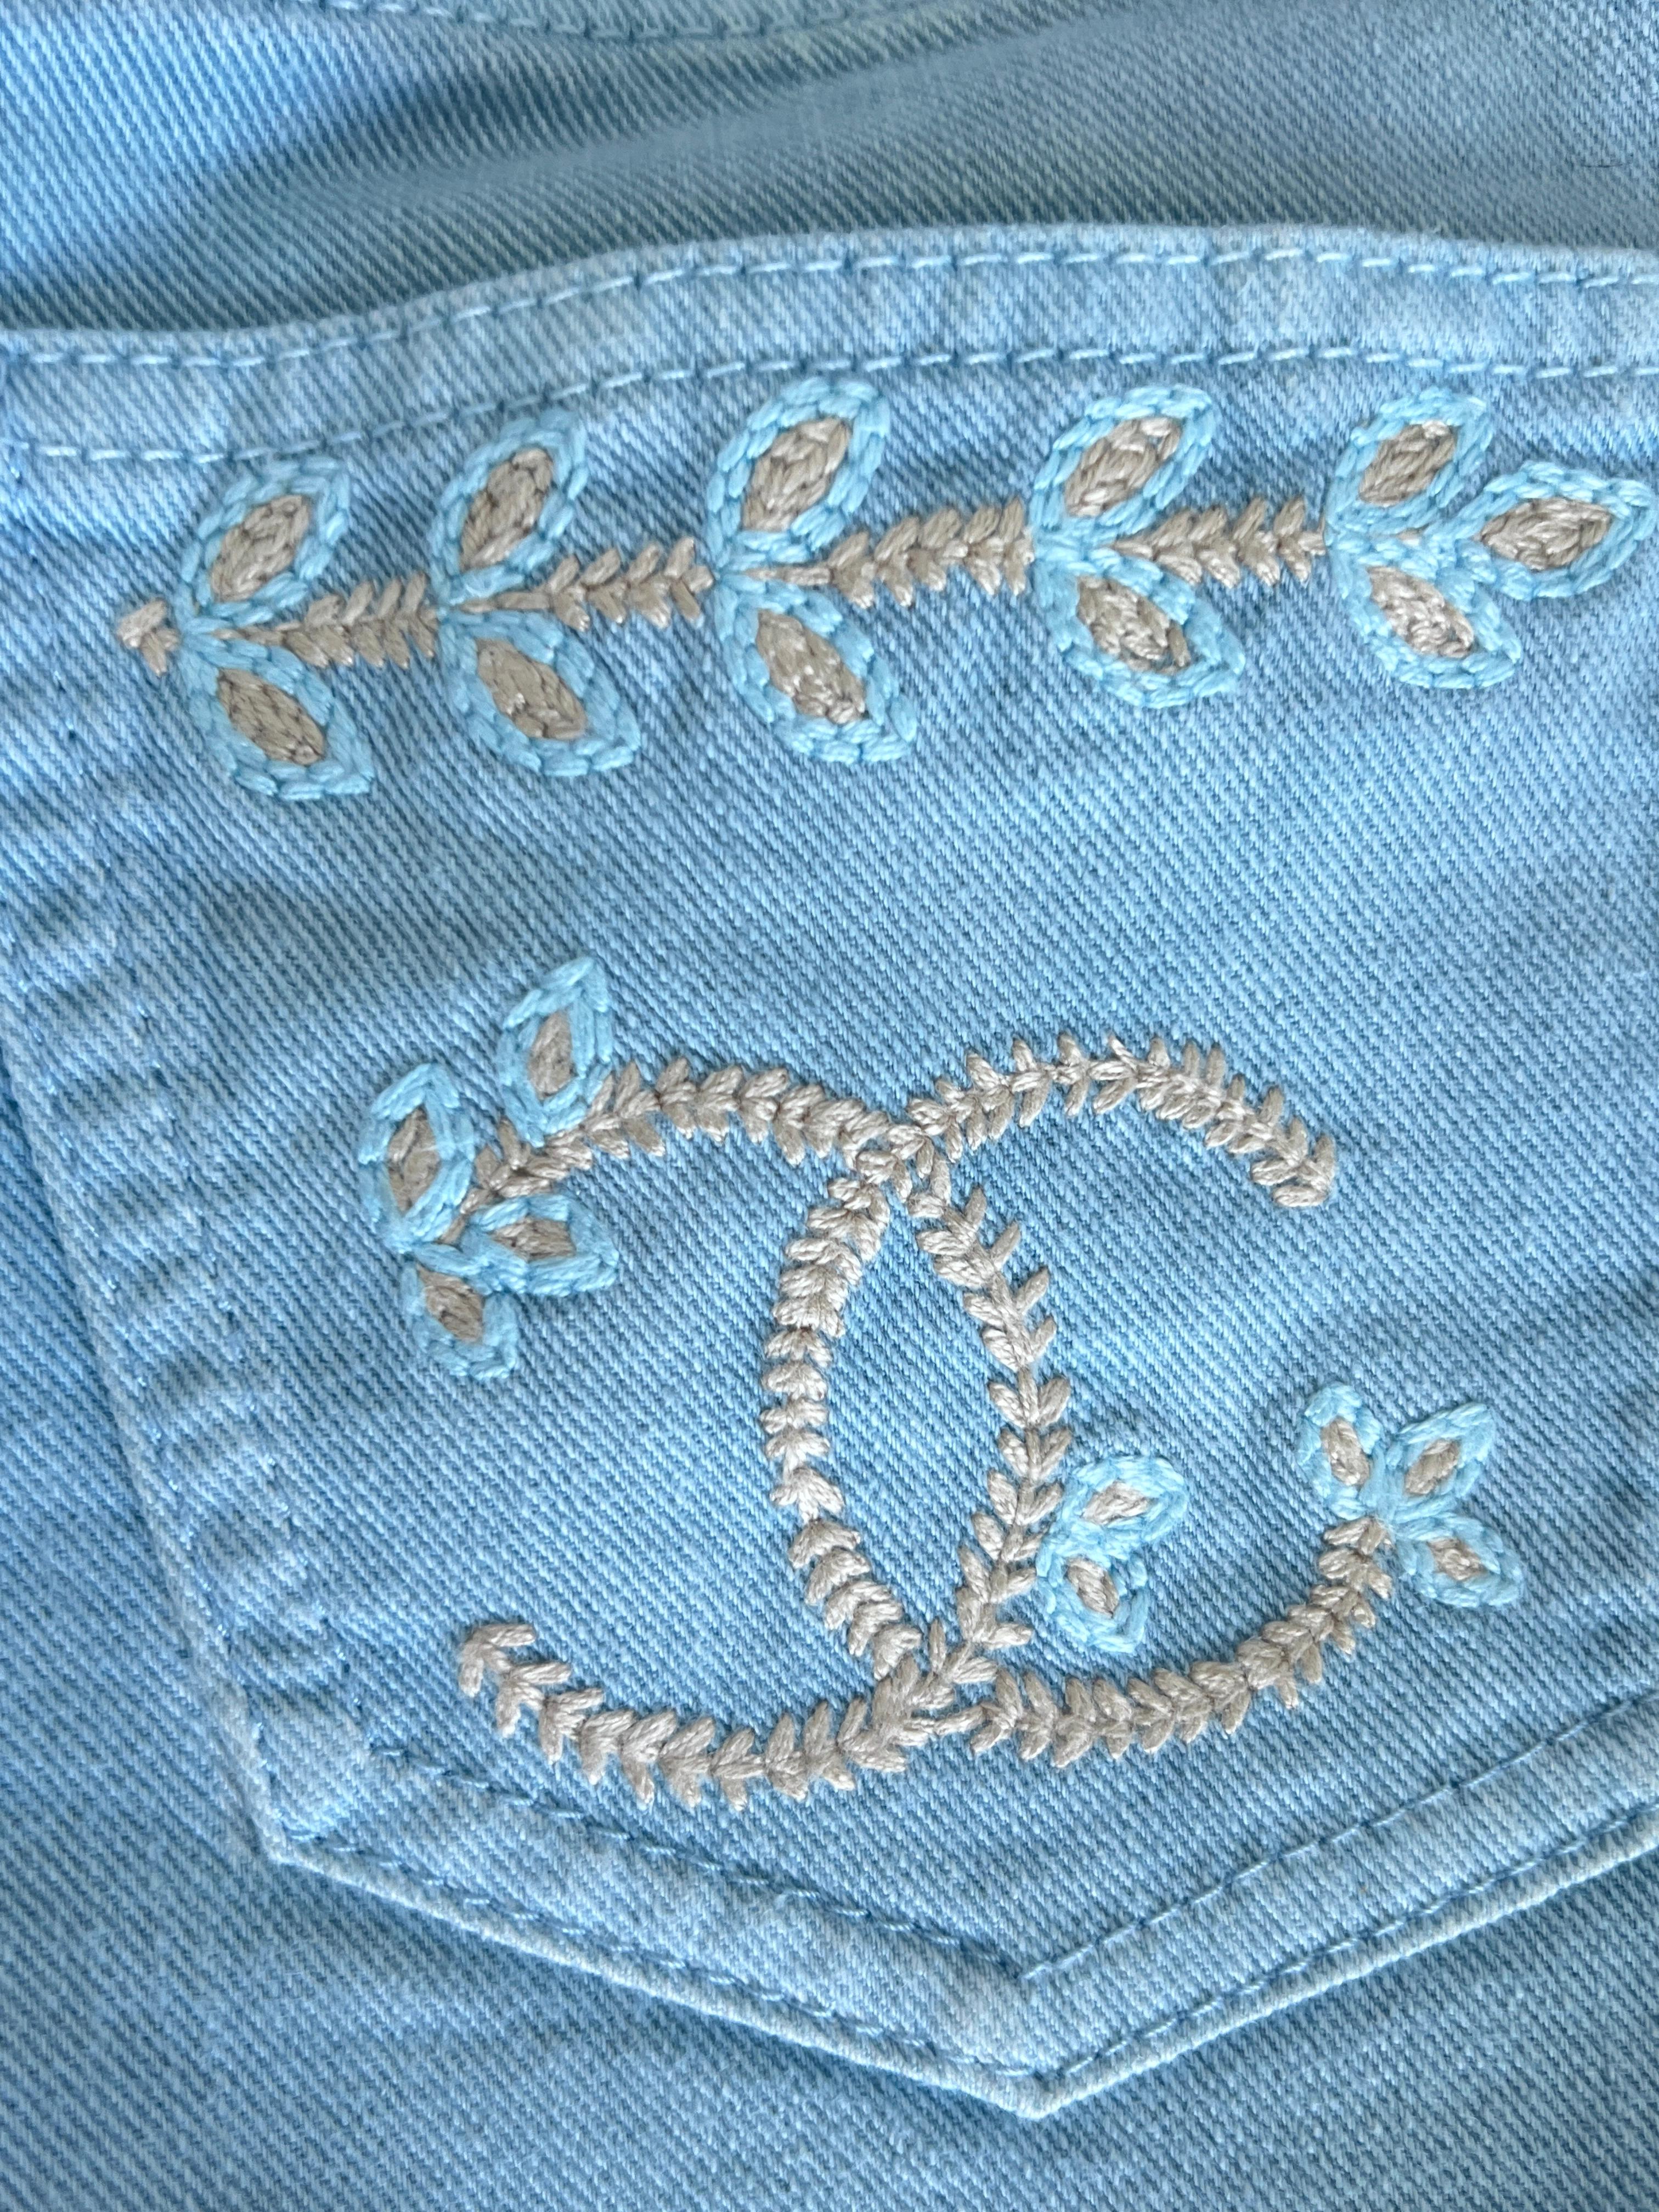 Chanel New CC Logo Embroidery Runway Jeans In New Condition For Sale In Dubai, AE